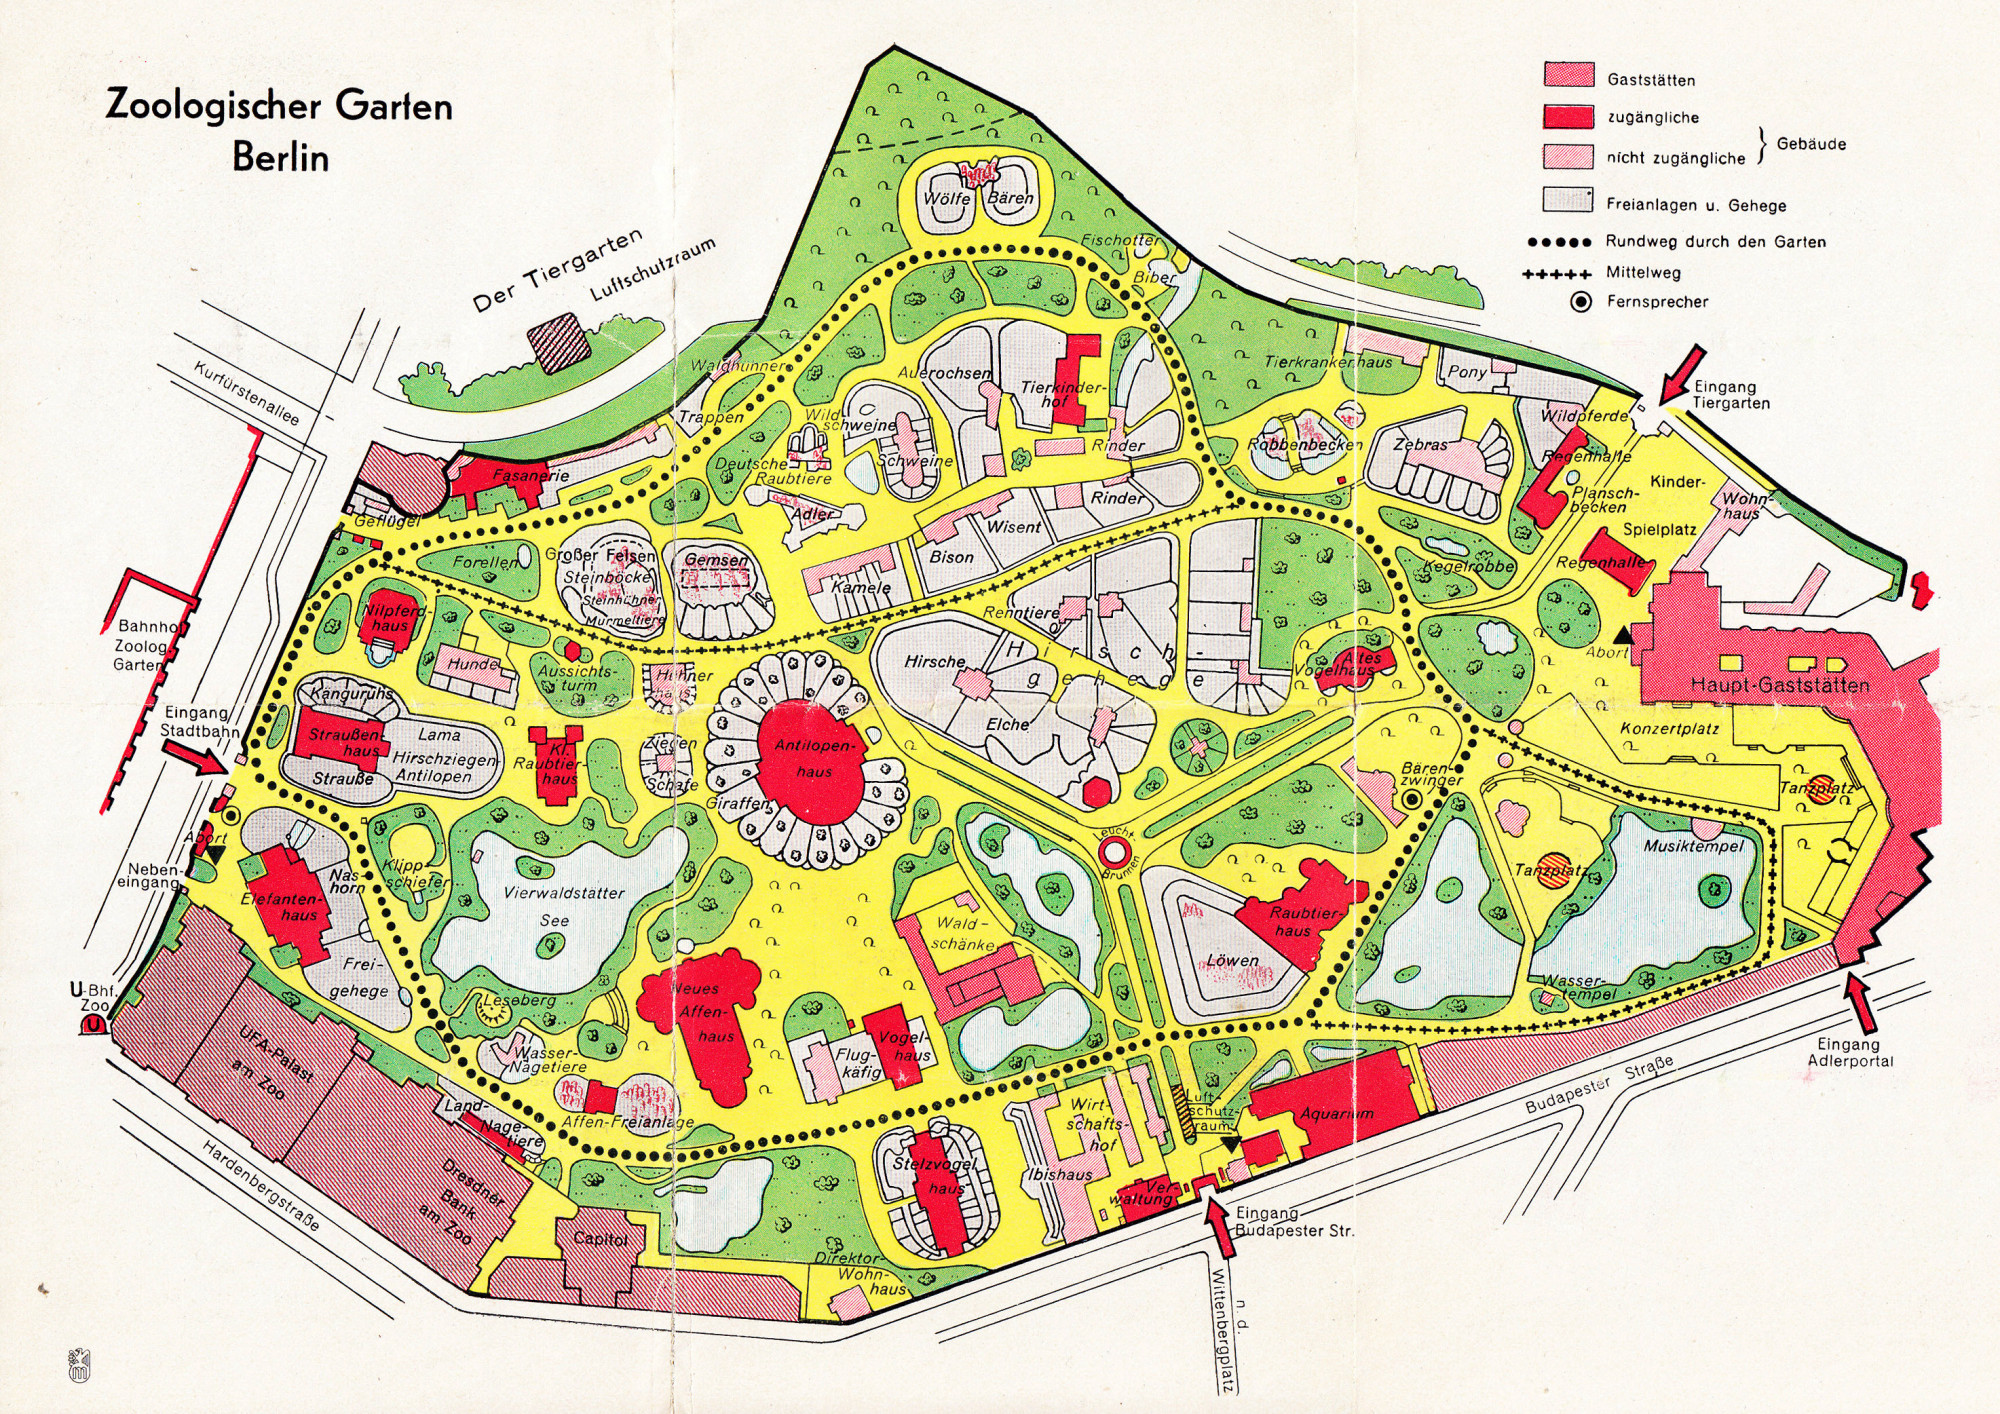 Colorful site plan showing enclosures, lakes, buildings, facilities, two air raid shelters, entrances, and the surrounding streets. Title: Zoological Garden Berlin.